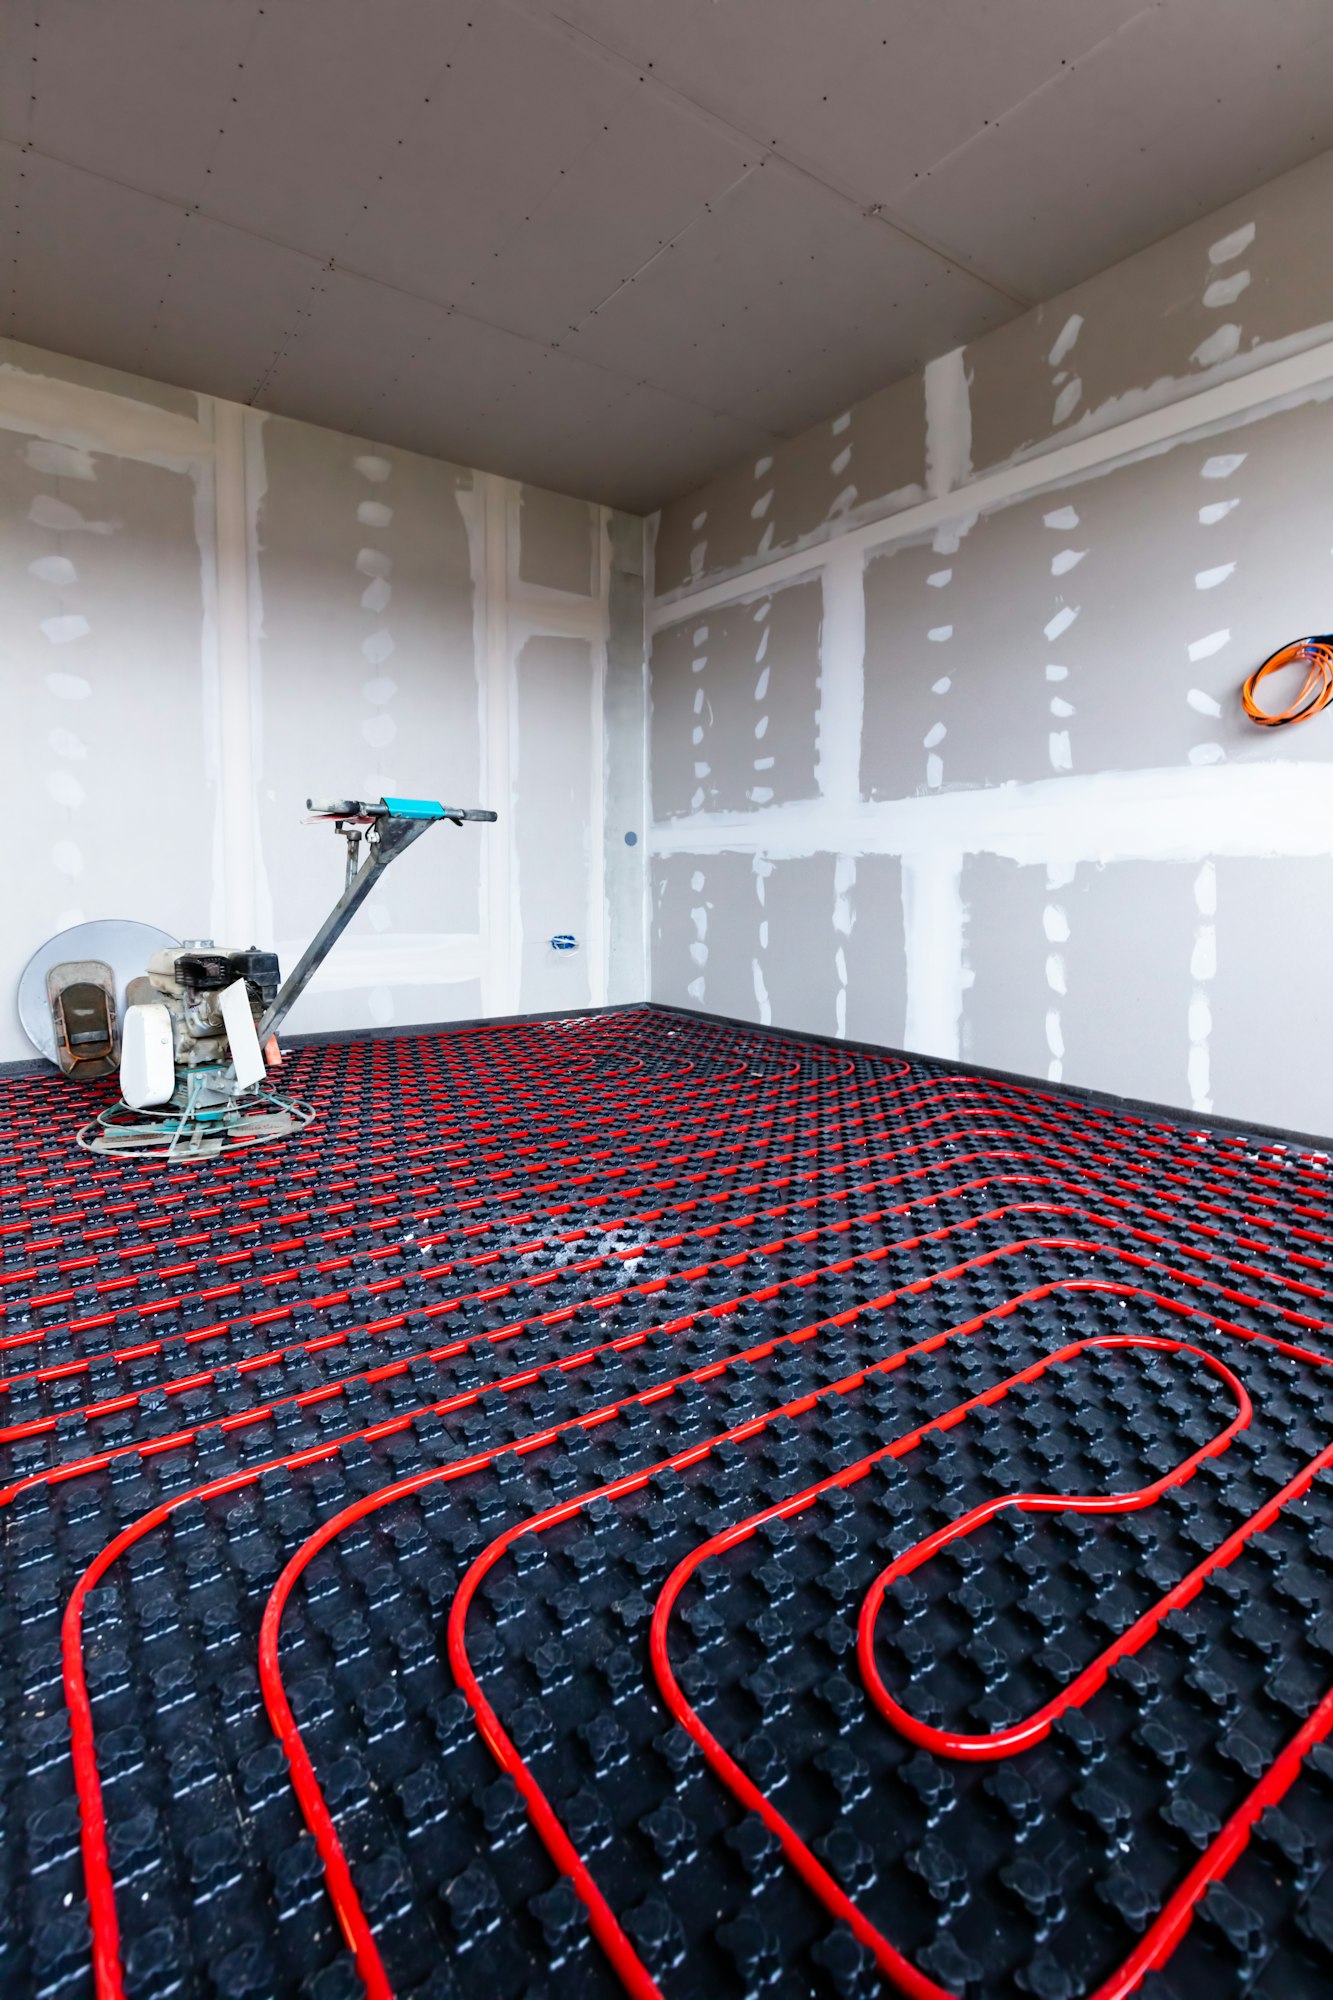 Floor heating in a new building. Interior design and finishing industry